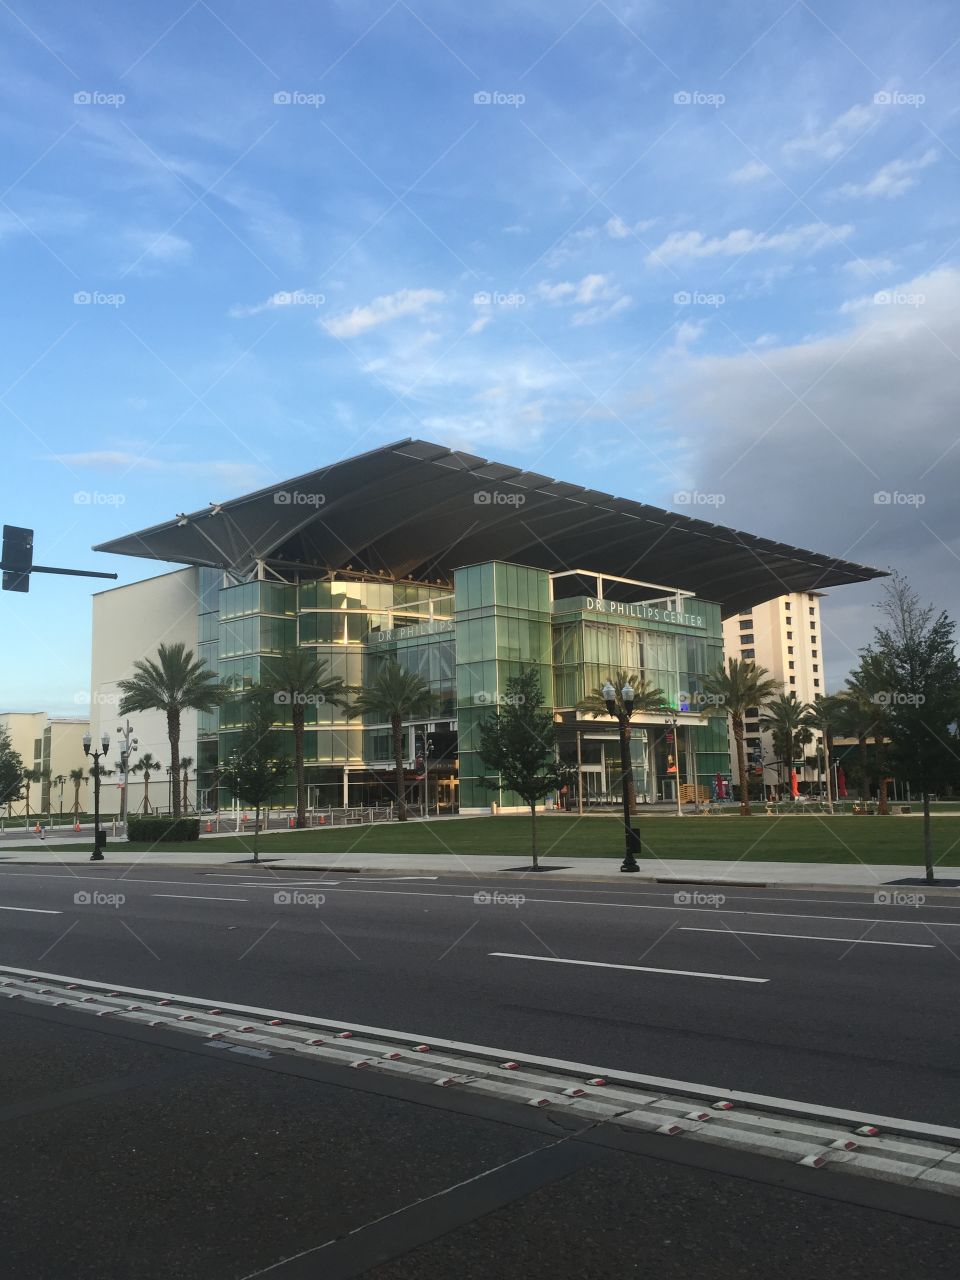 Dr Phillips center for the arts